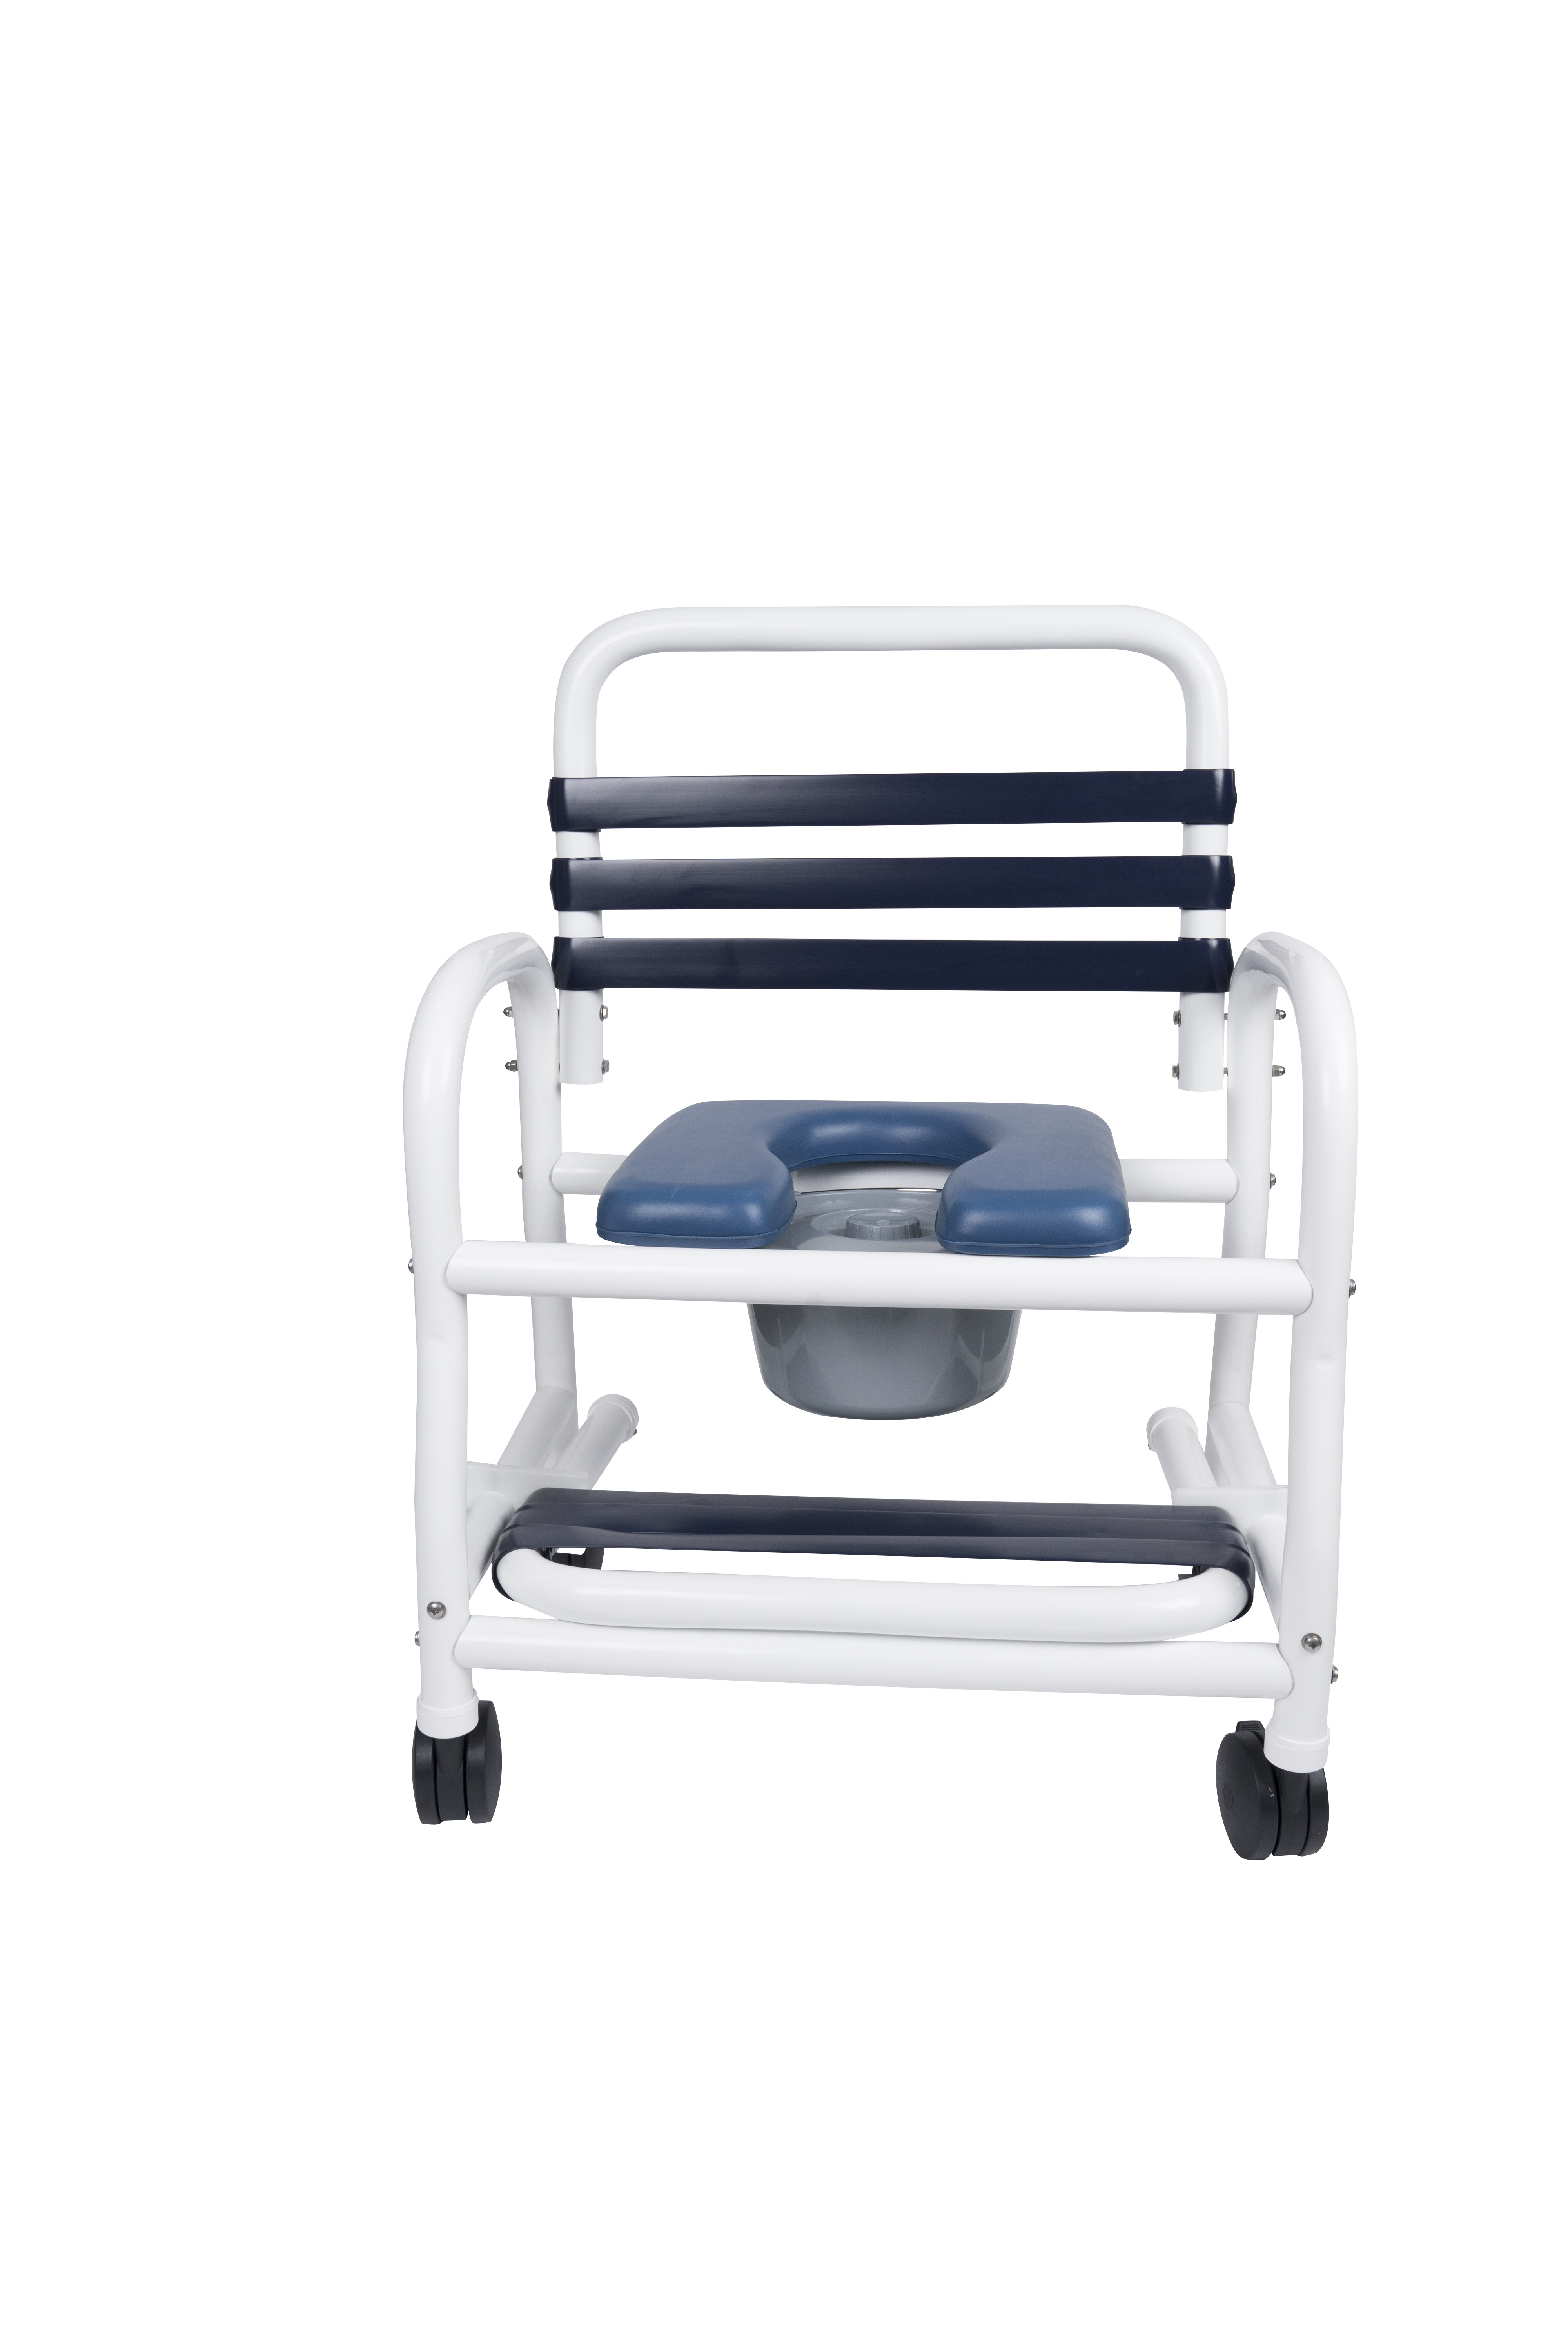 Picture of Infection Control Design DNE-126-4TWL-SF 26 in. Deluxe New Era Infection Control Shower Commode Chair, 4 in. Twin Size - 22 x 17 x 38.5 in.